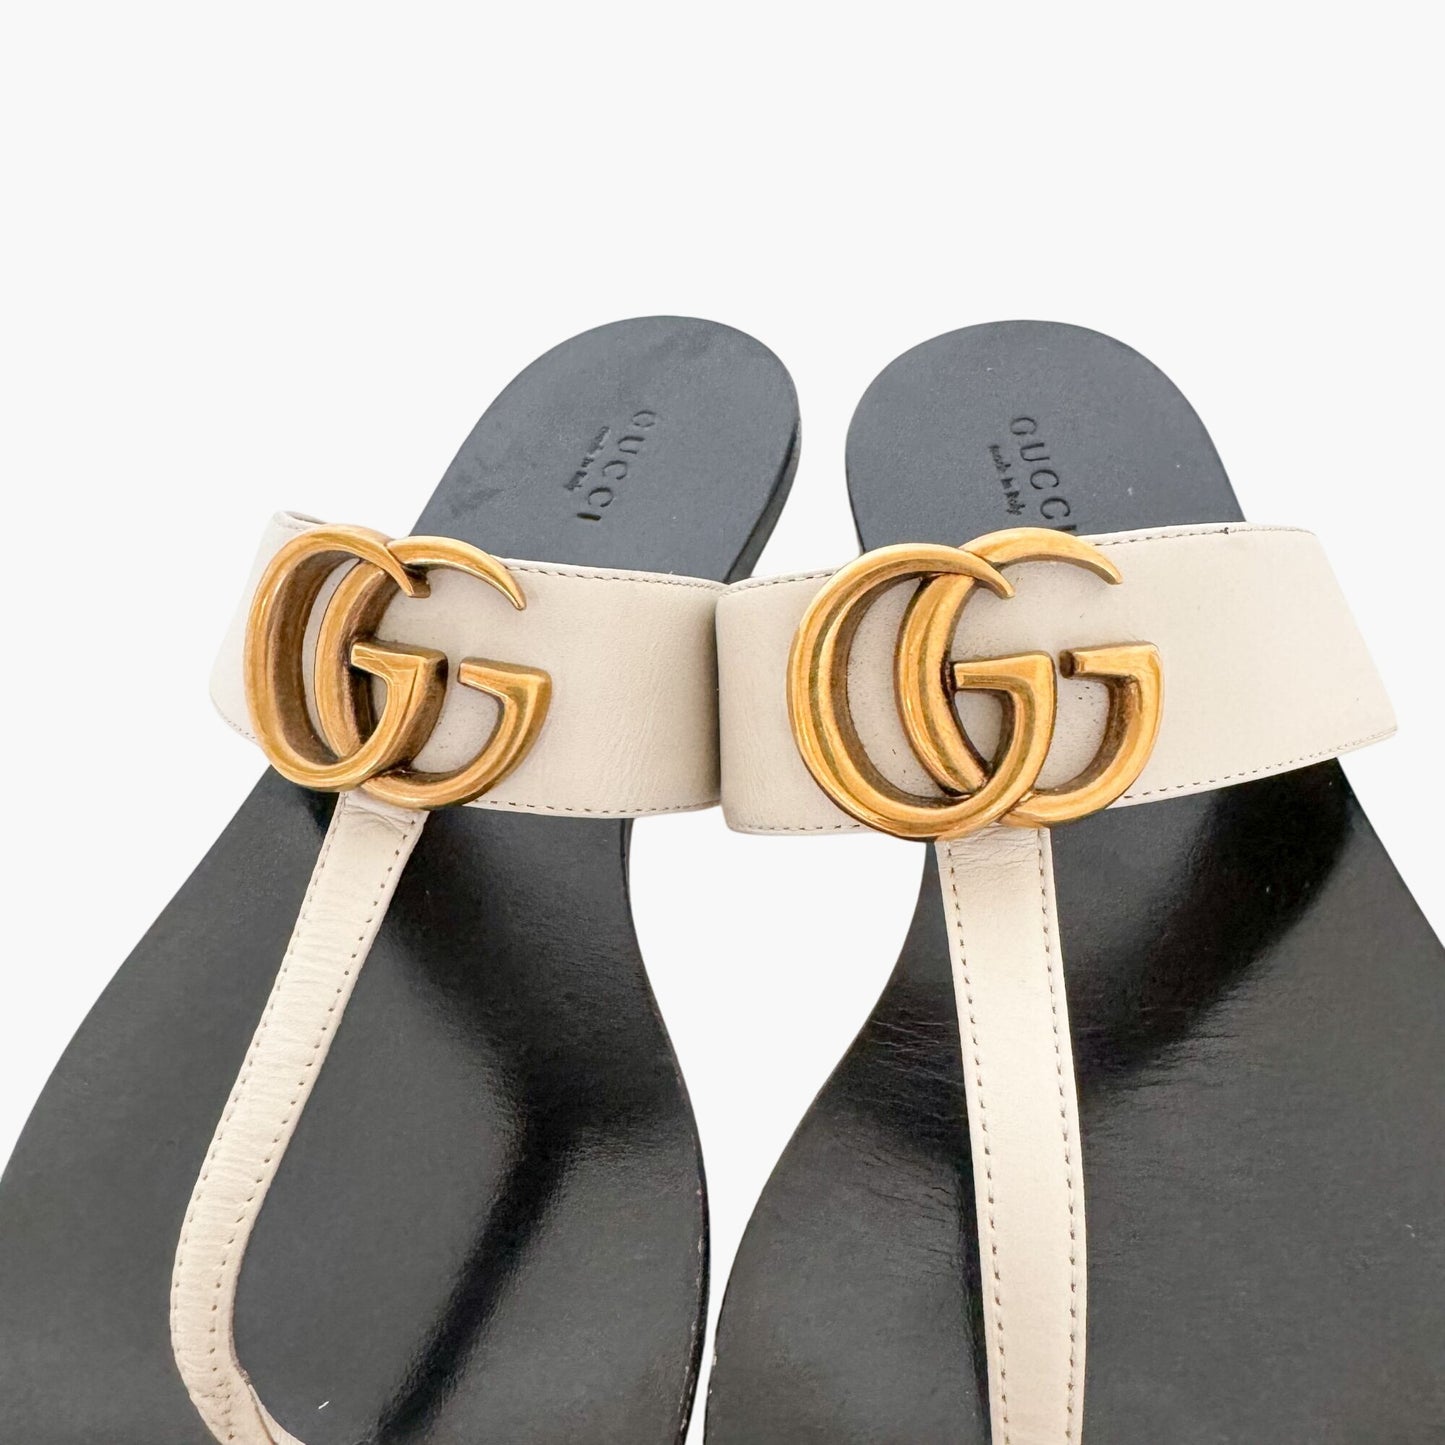 Gucci Marmont GG Thong Sandals in White Leather Size 38.5